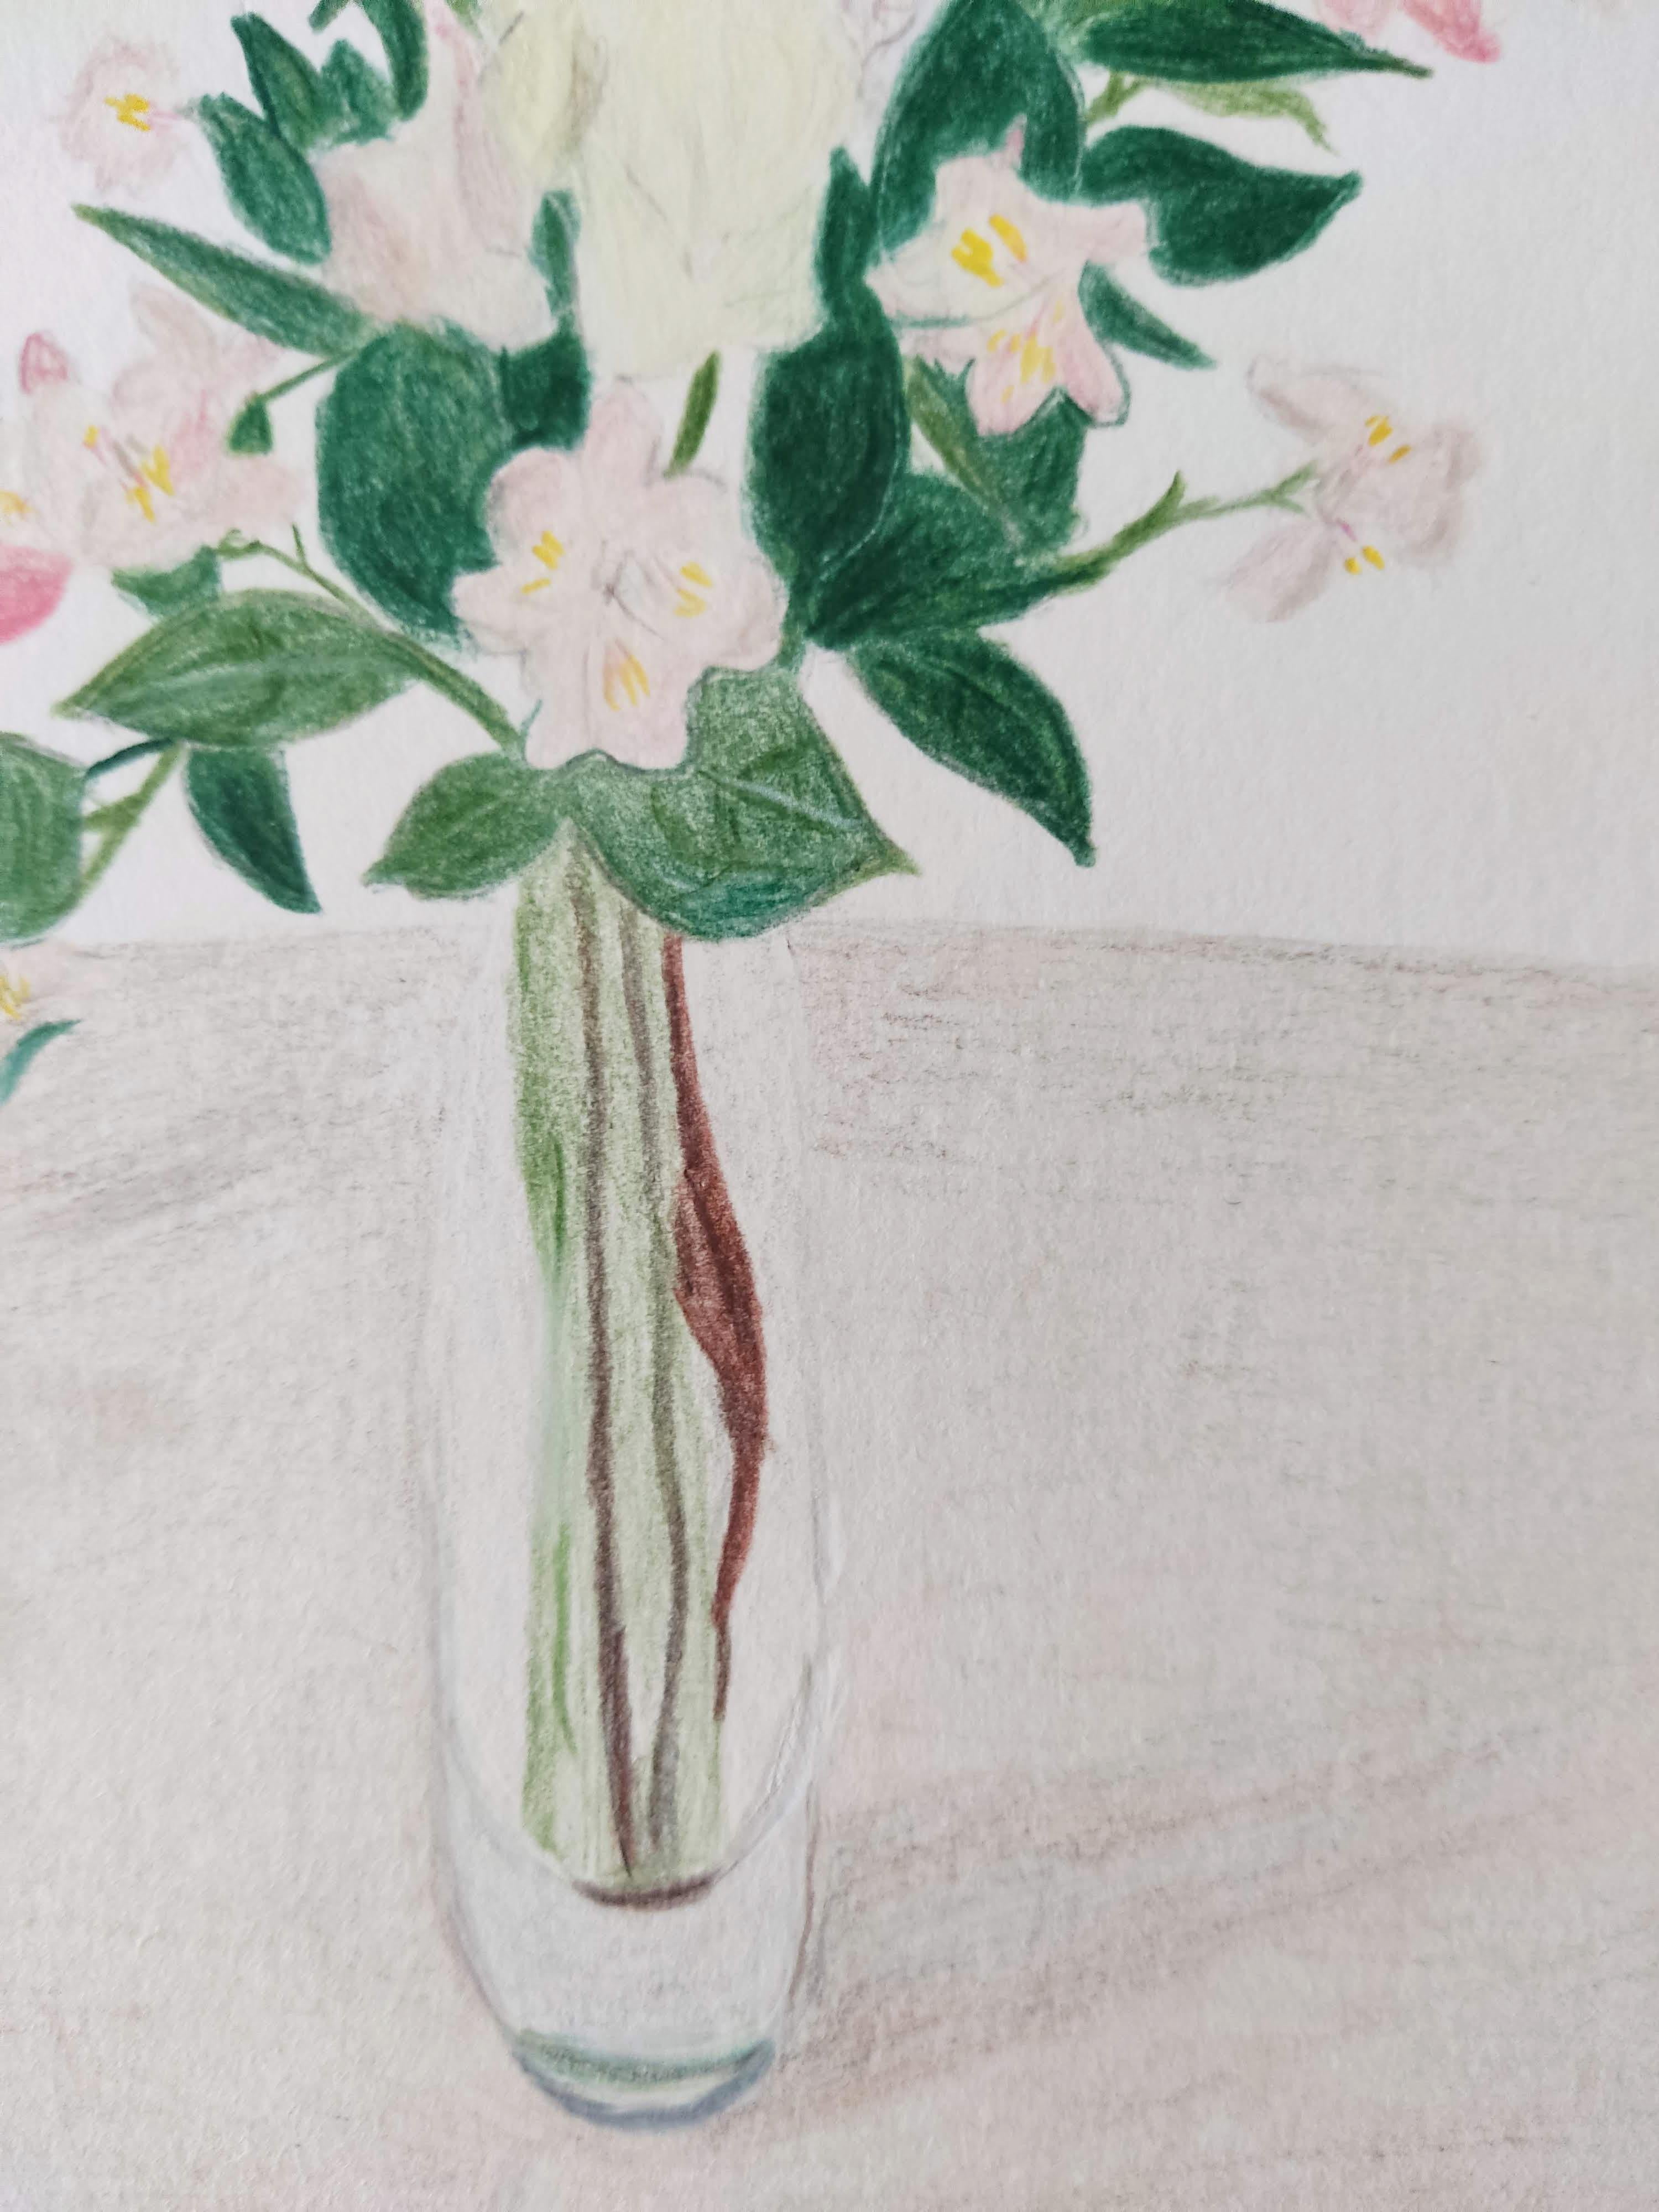 Seringa with Vase - Colored Pencils, Flowers, Interior - Contemporary Art by Gabriel Riesnert